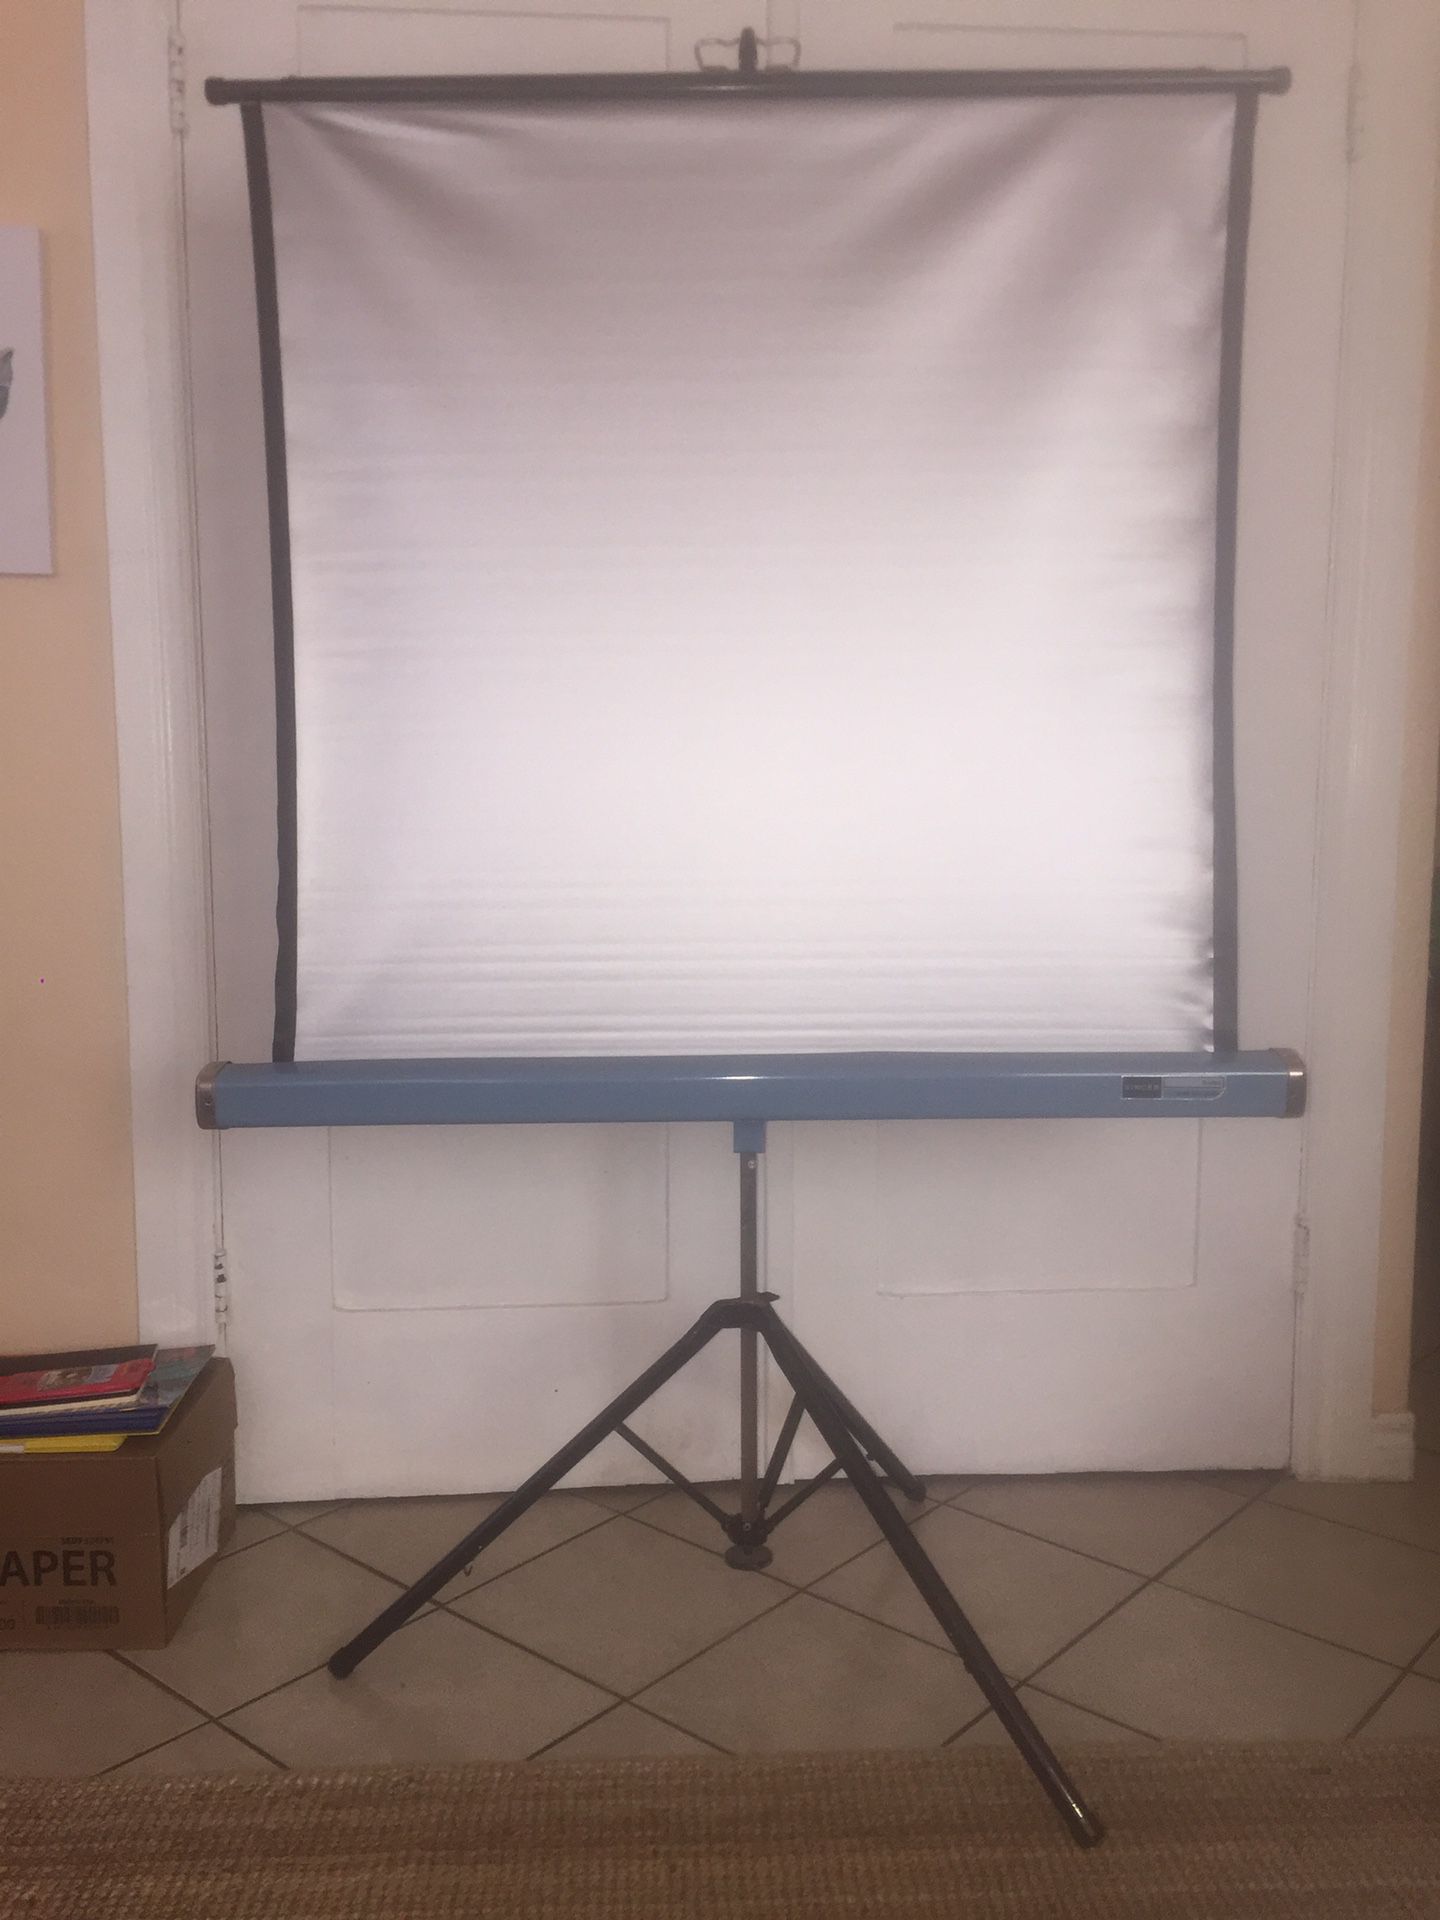 SINGER Adjustable & Collapsable Projector Screen, 37 inches